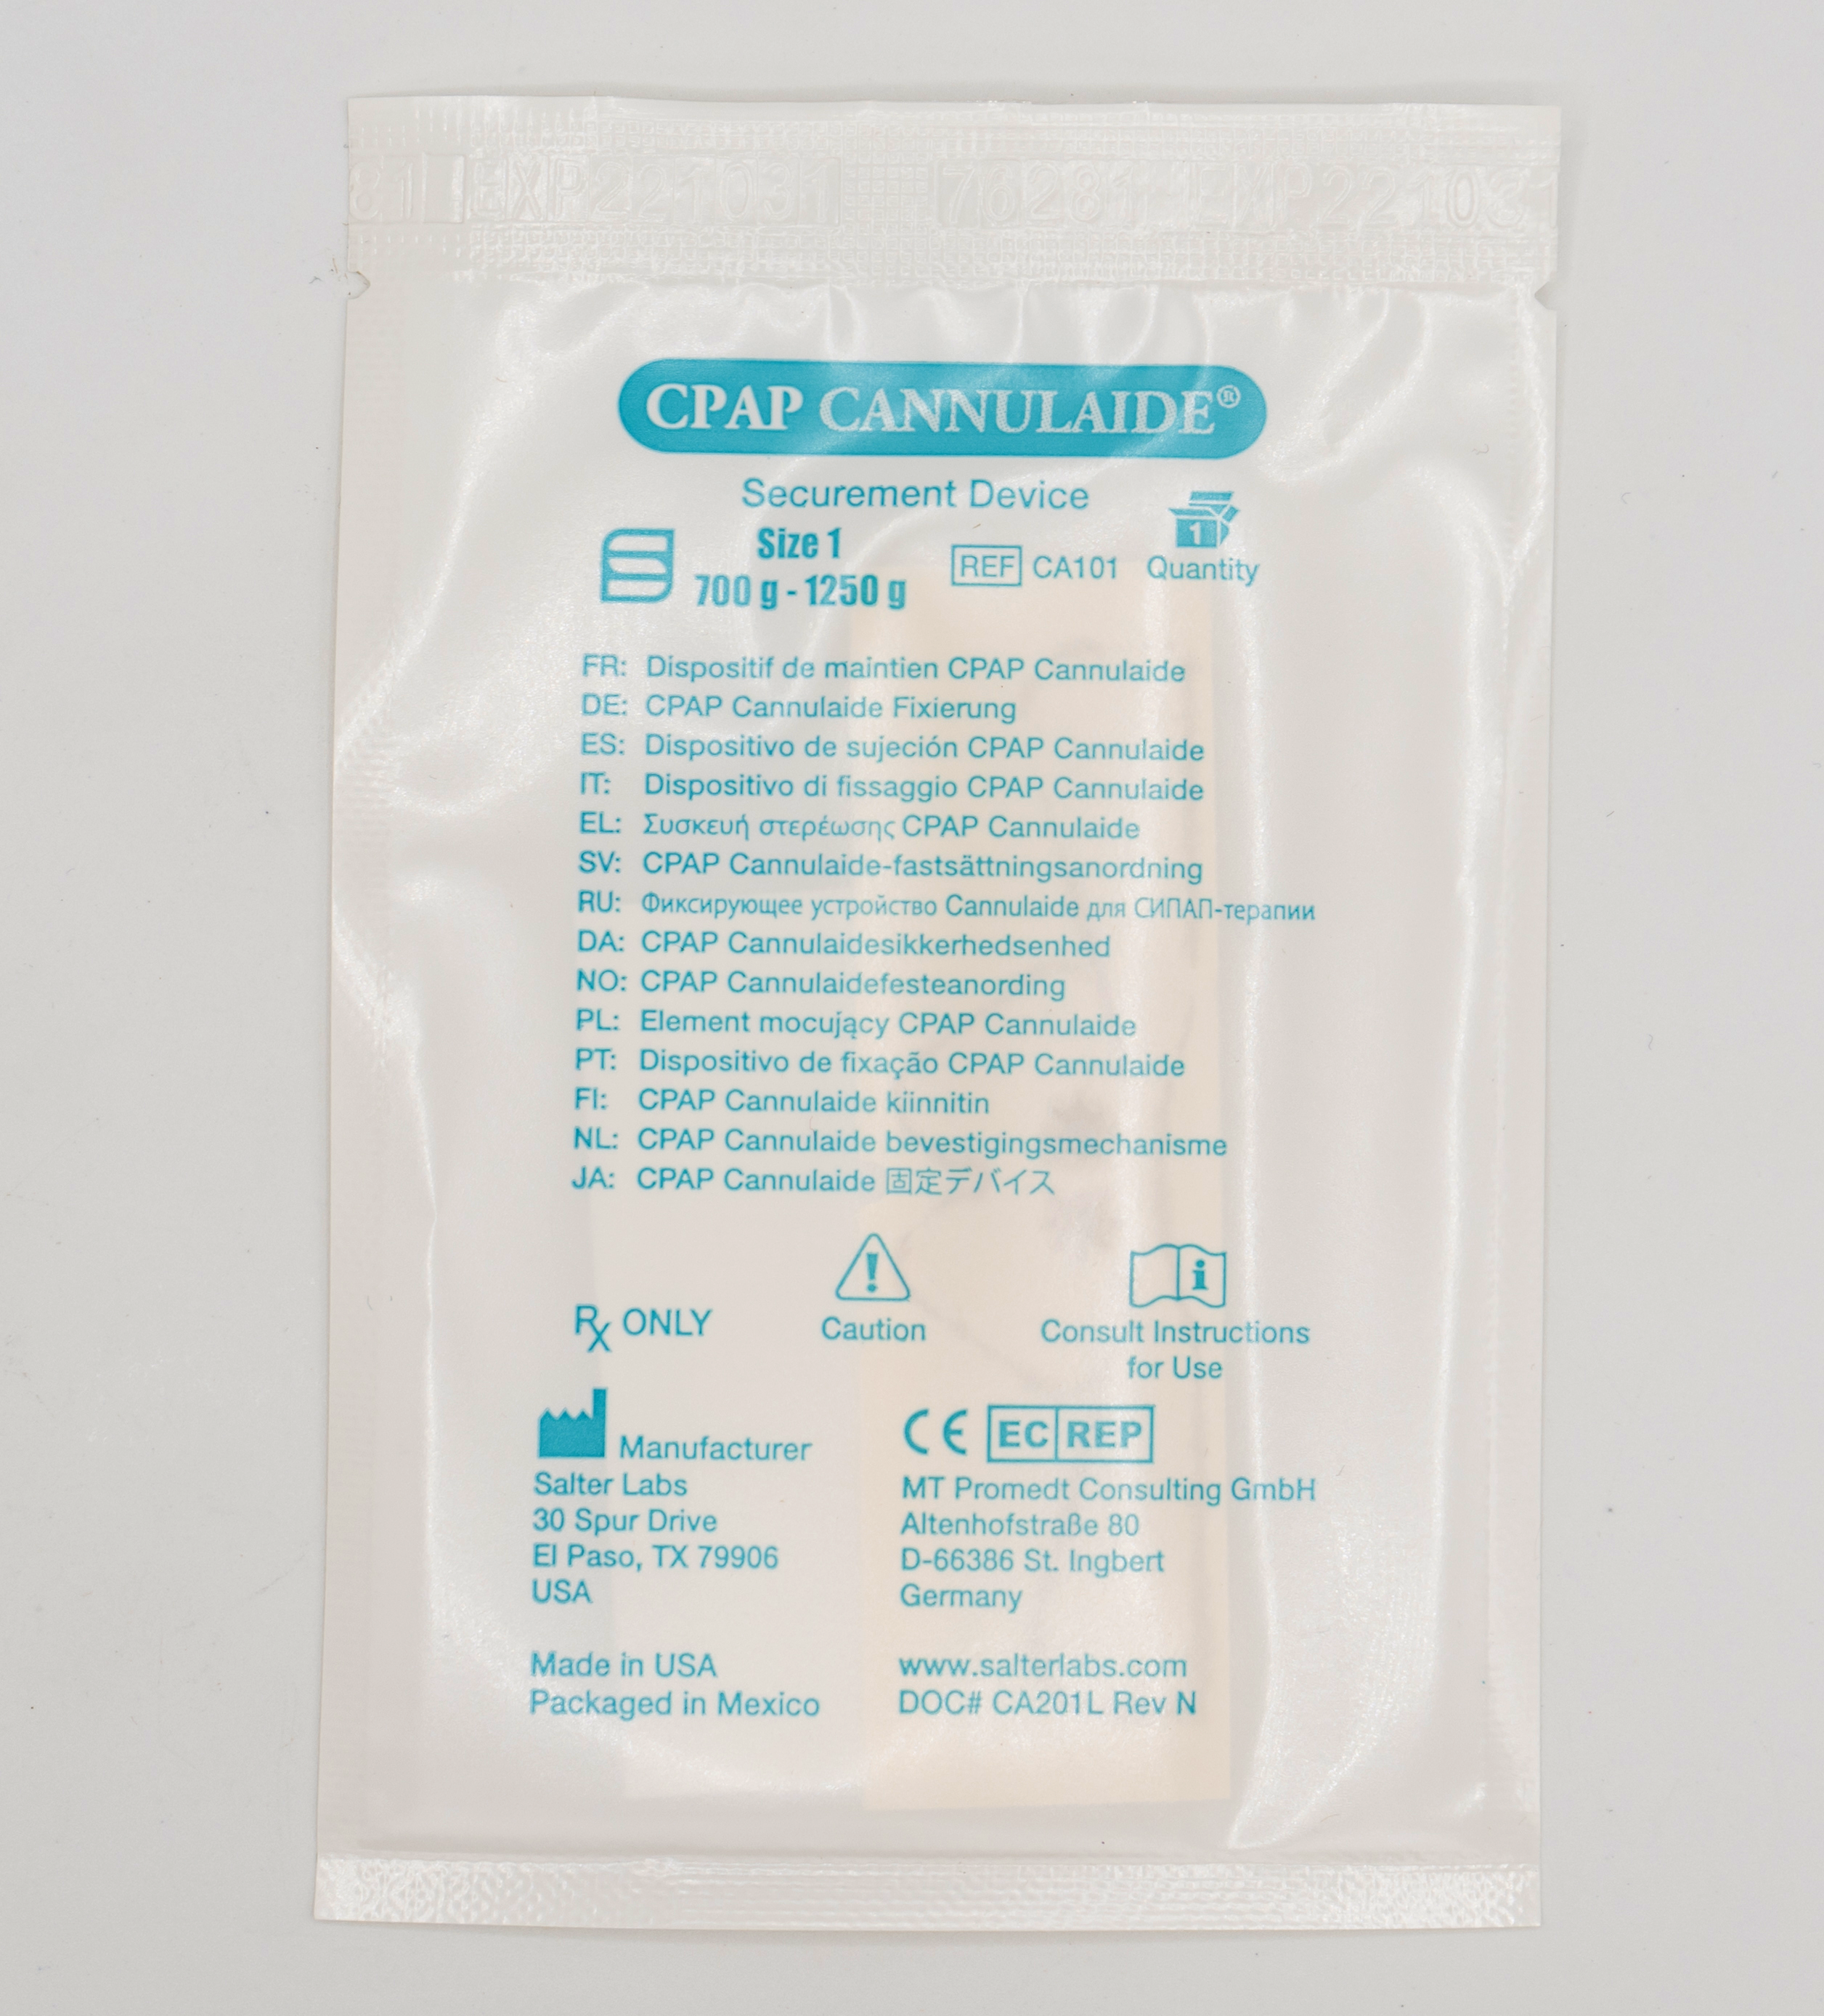 CPAP Cannulaide® Securement Device CA101-0-25 | Size 1, for babies 700-1250g